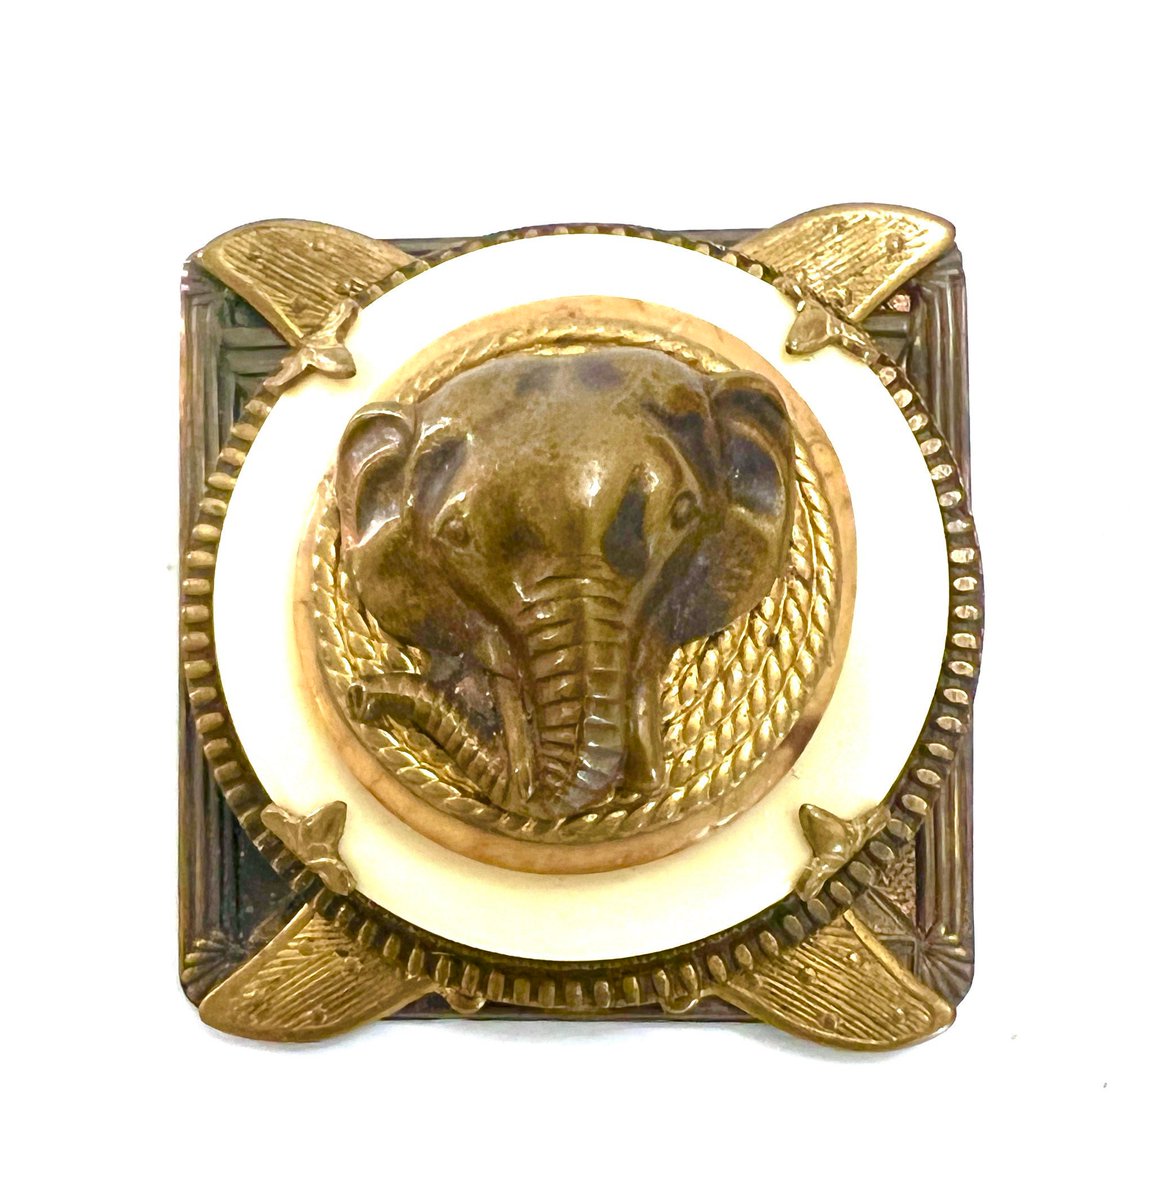 Patrice Brass & Resin Elephant Brooch Egyptian Revival Dimensional Elephant Head Intricacy Detailed Vintage Brass Accents Gift for Her #VintagePatrice #PatriceElephantPin $120.75 ➤ etsy.com/listing/124436…